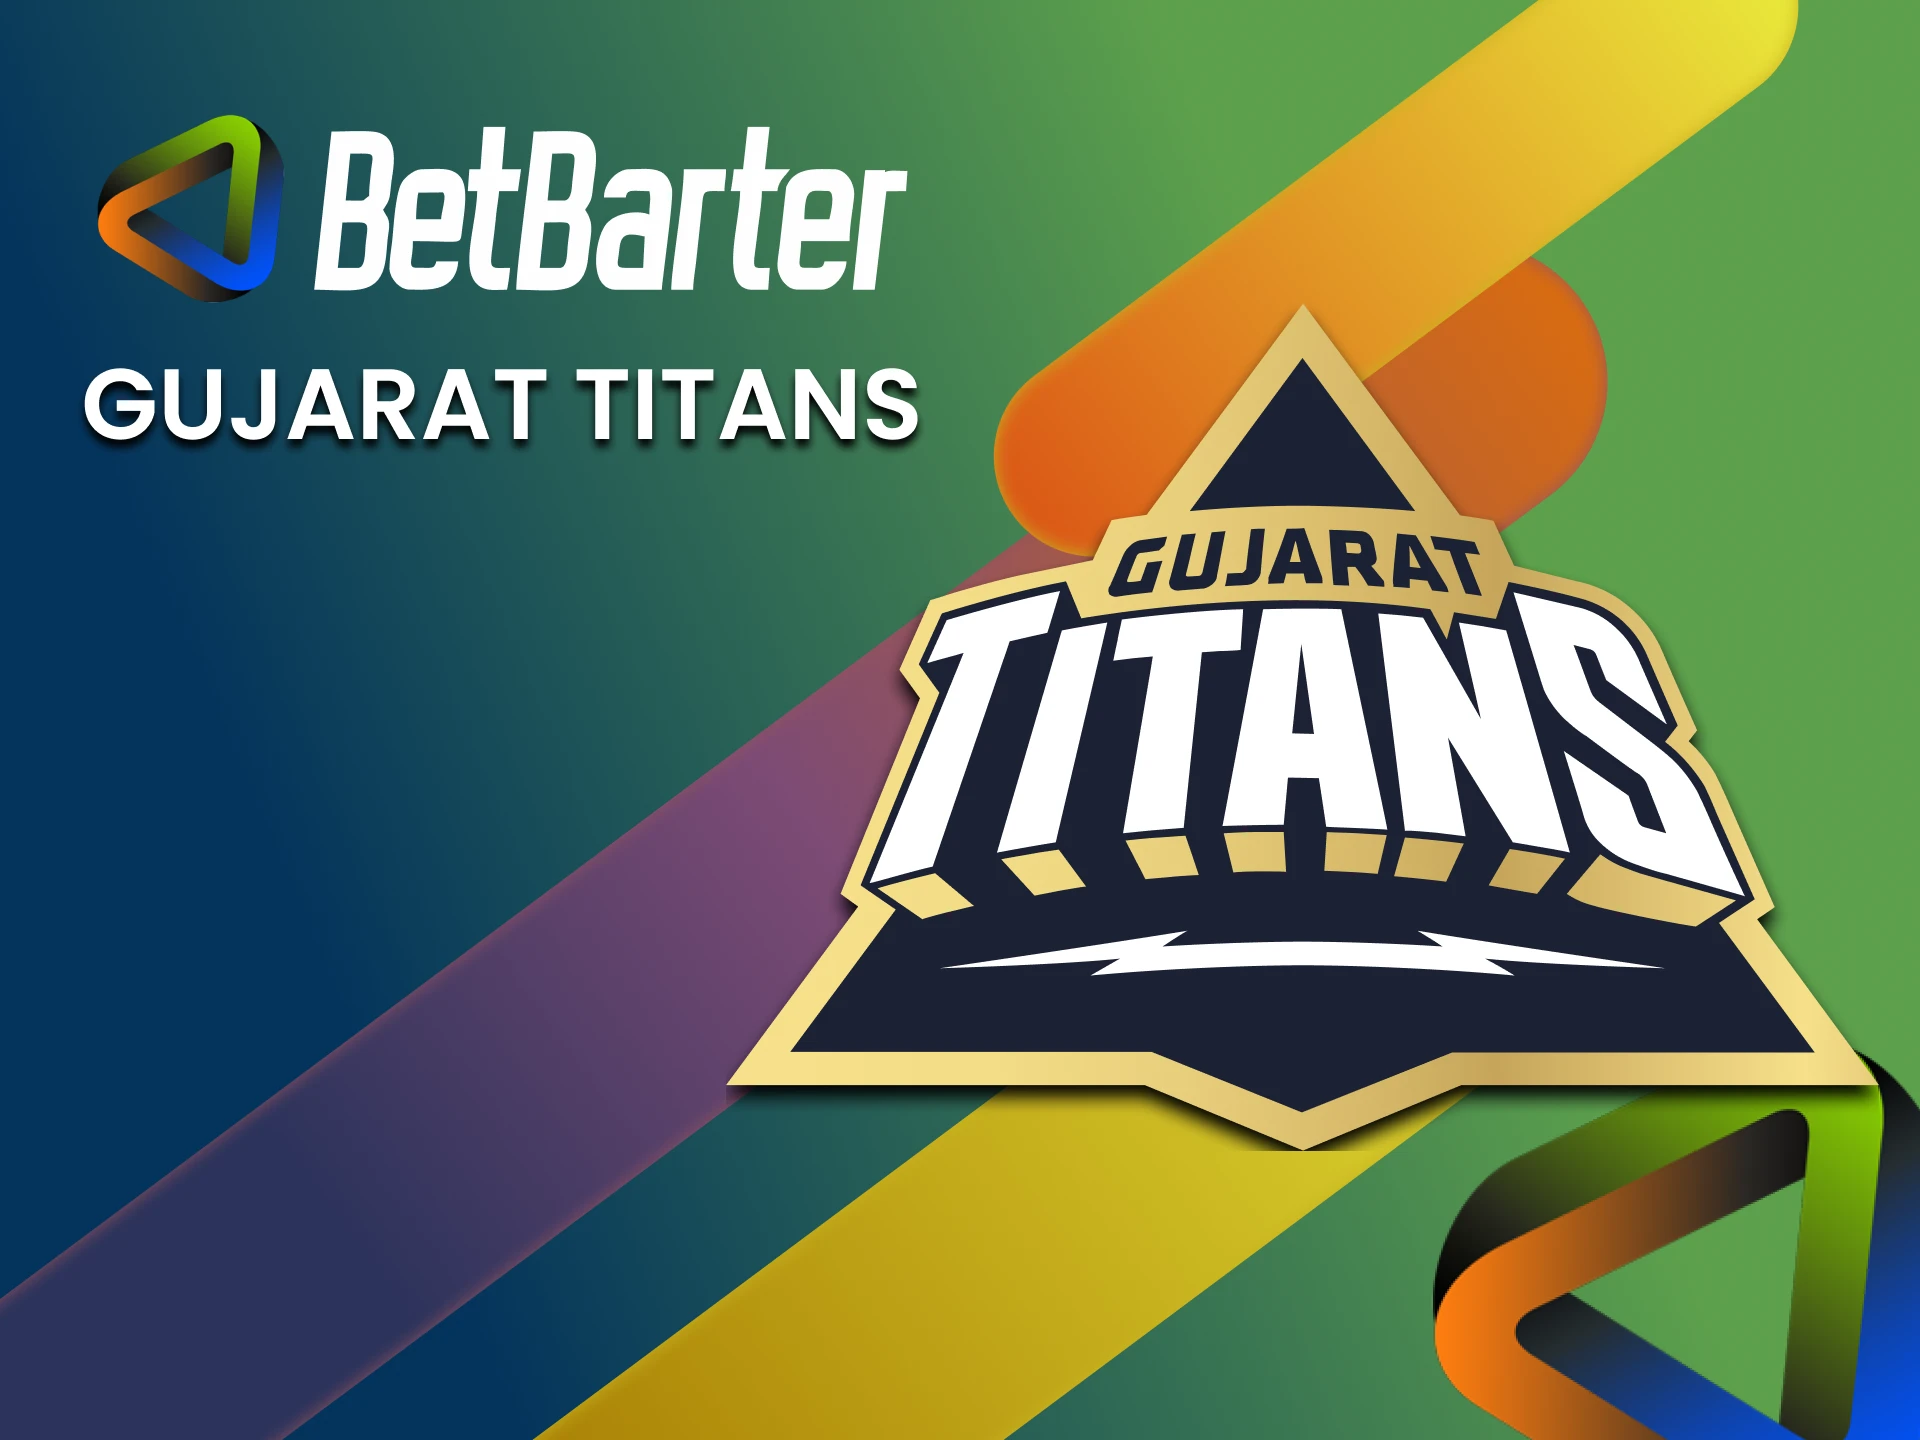 Choose the Gujarat Titans team to bet on BetBarter in the IPL league.